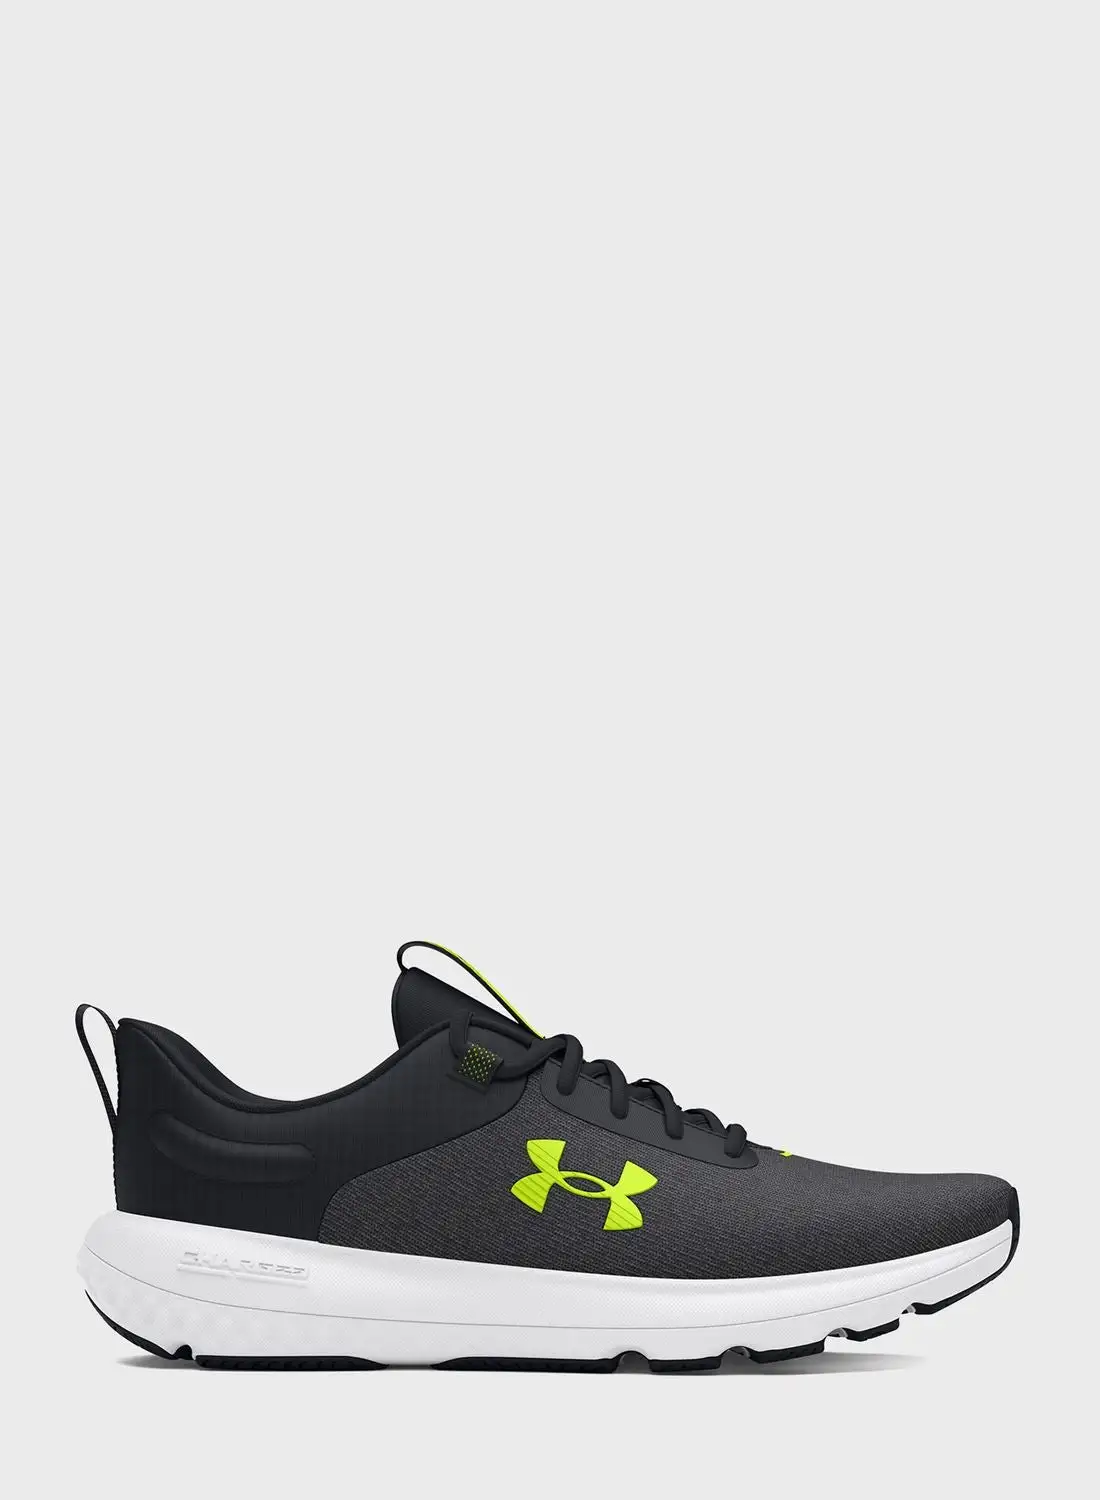 UNDER ARMOUR Charged Revitalize Sneakers